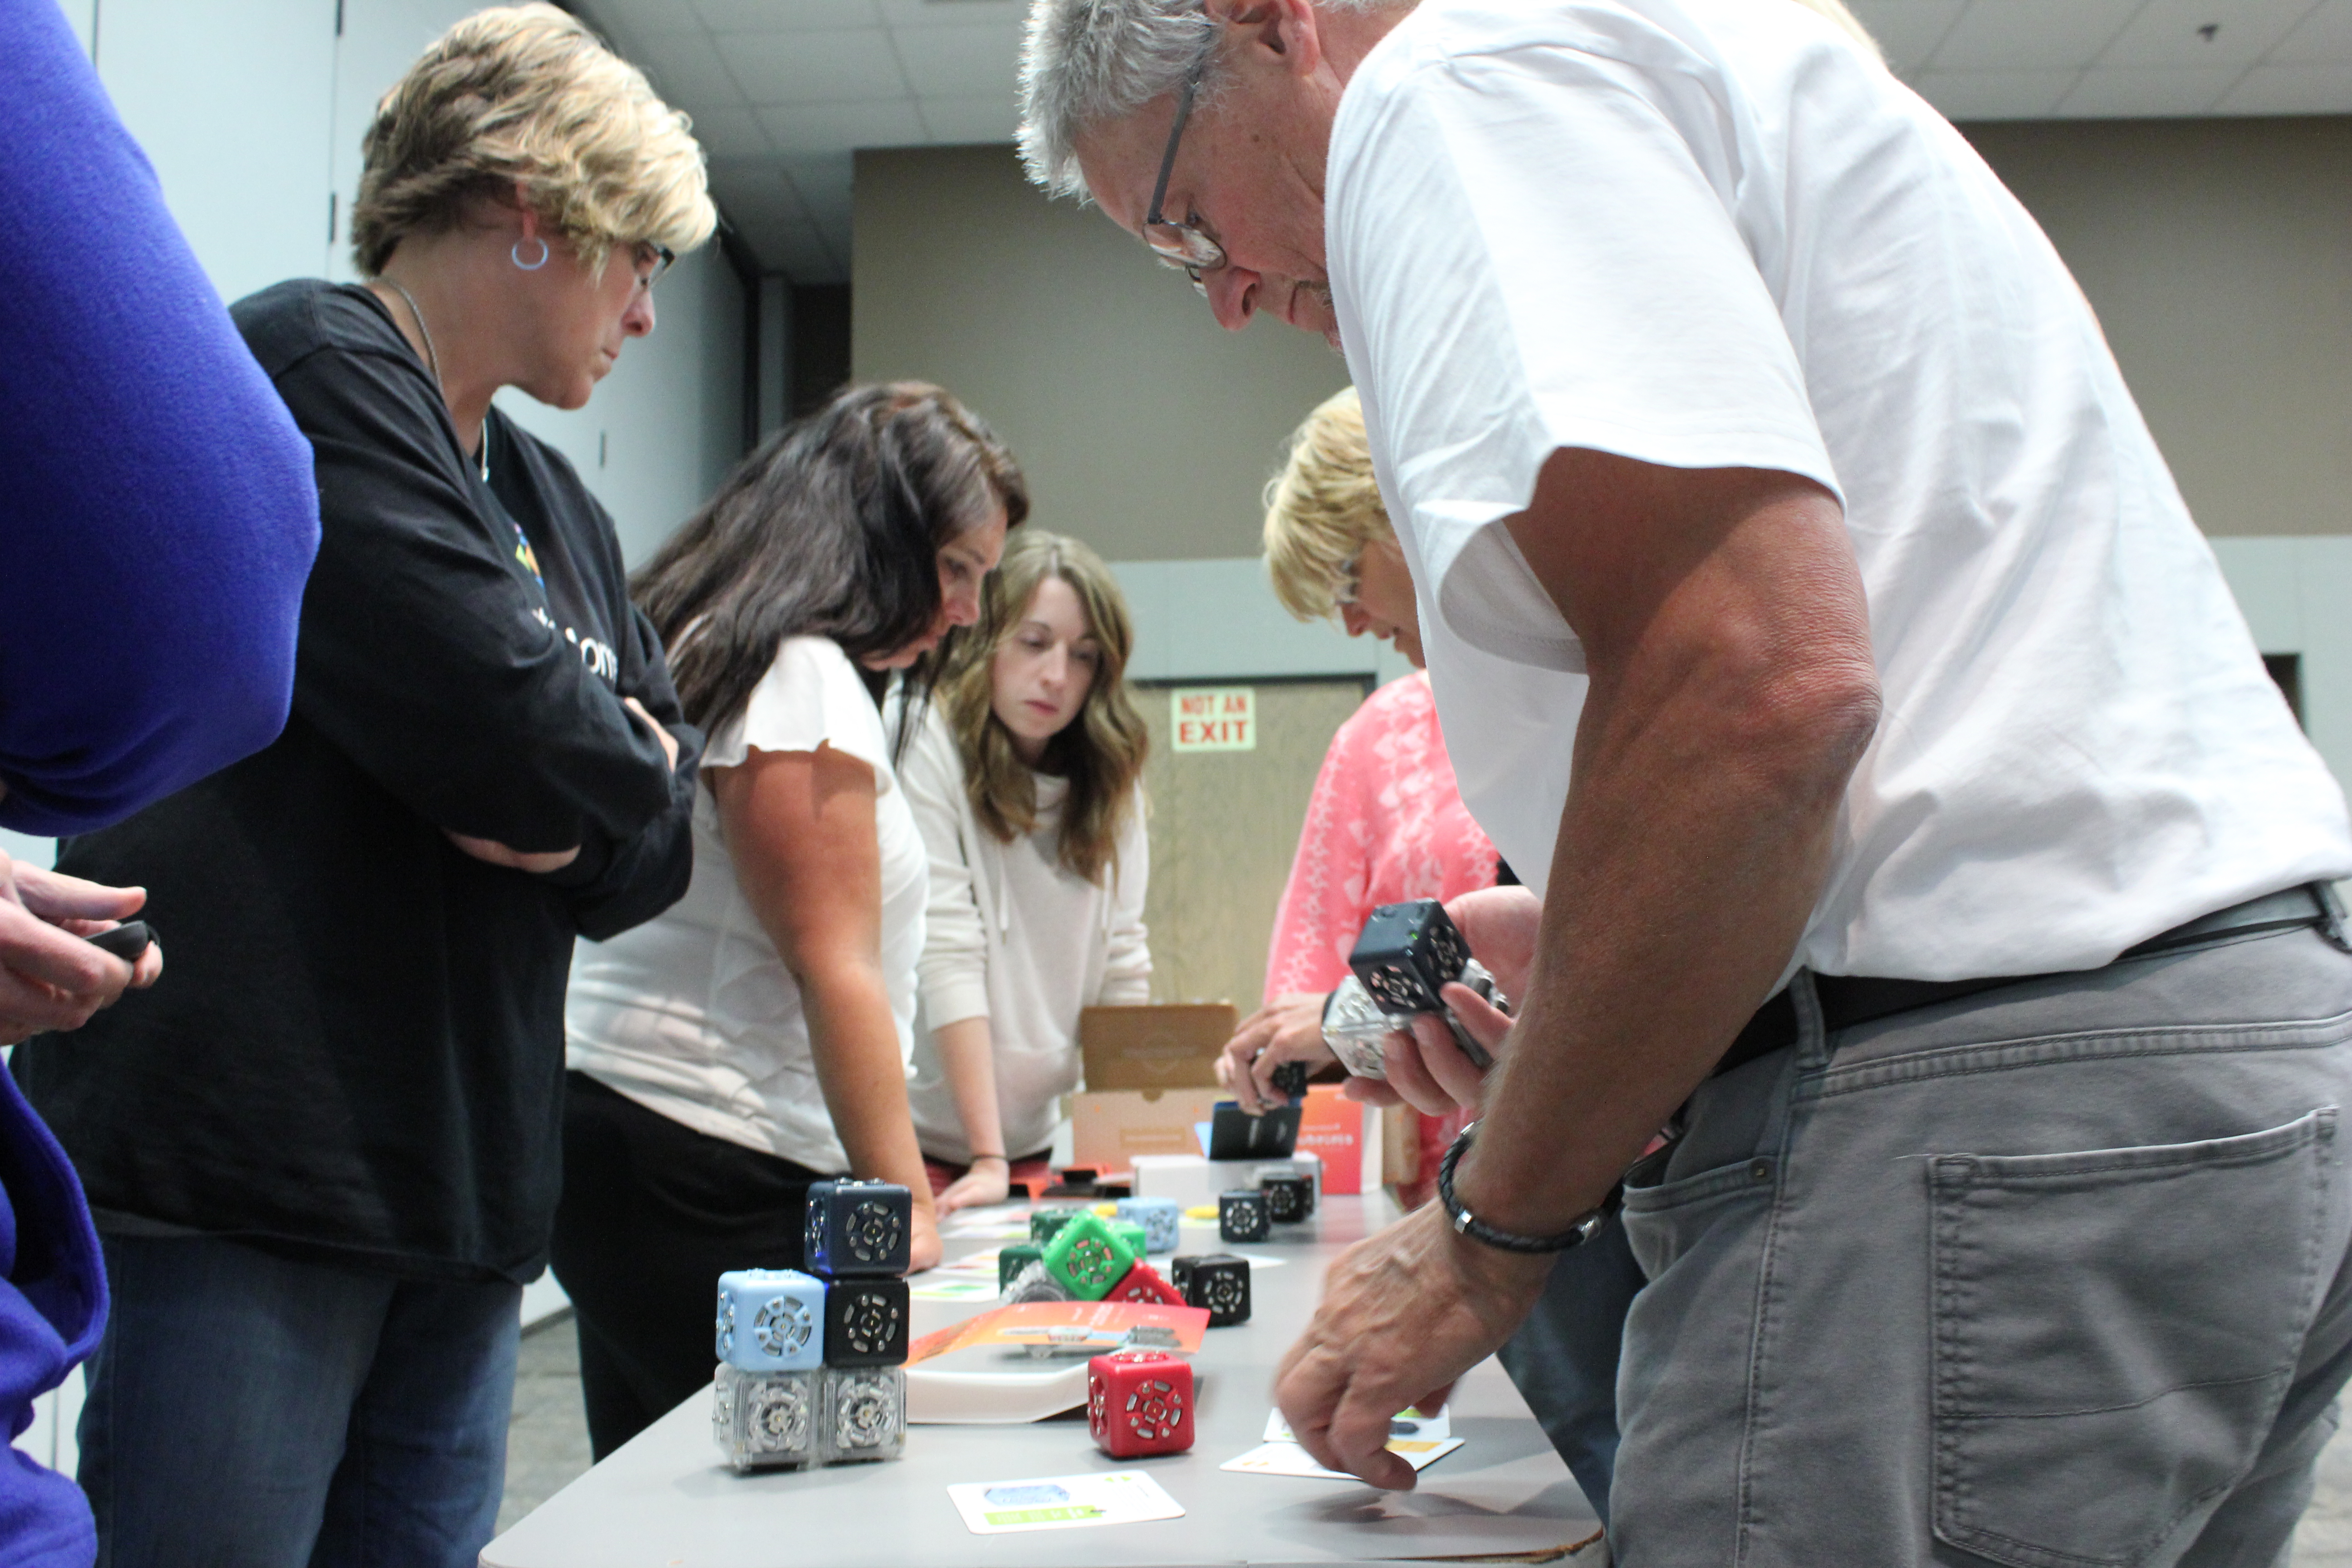 Waterloo training for Making STEM Connections